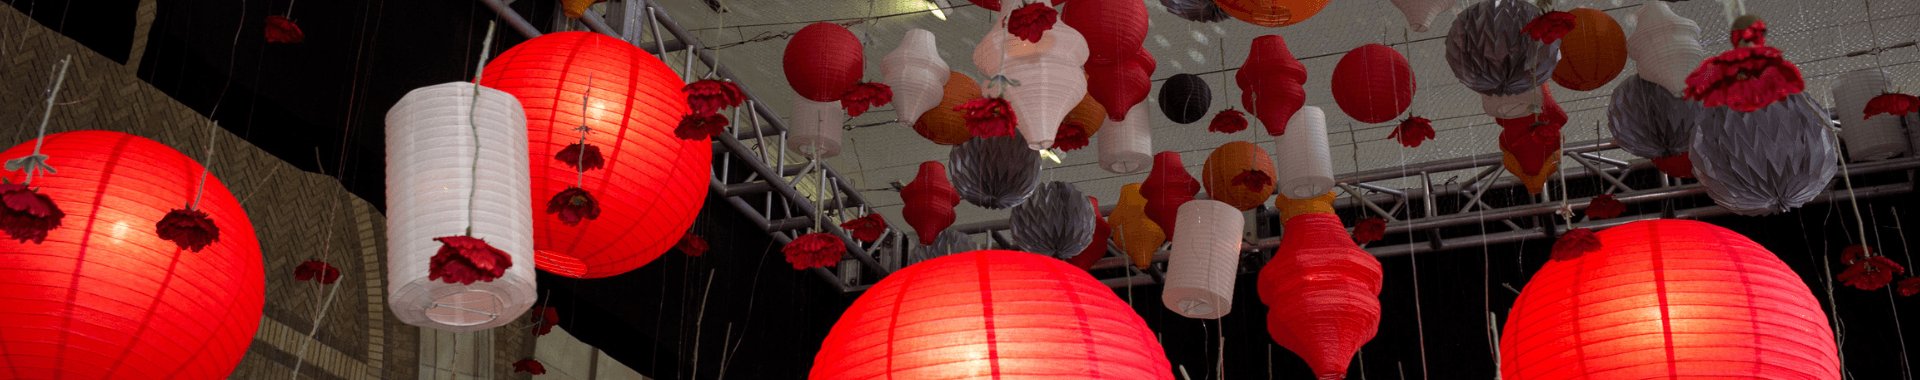 Paper lanterns and poppies hung from the ceiling as decorations at Believe in Brookline Kids 2019